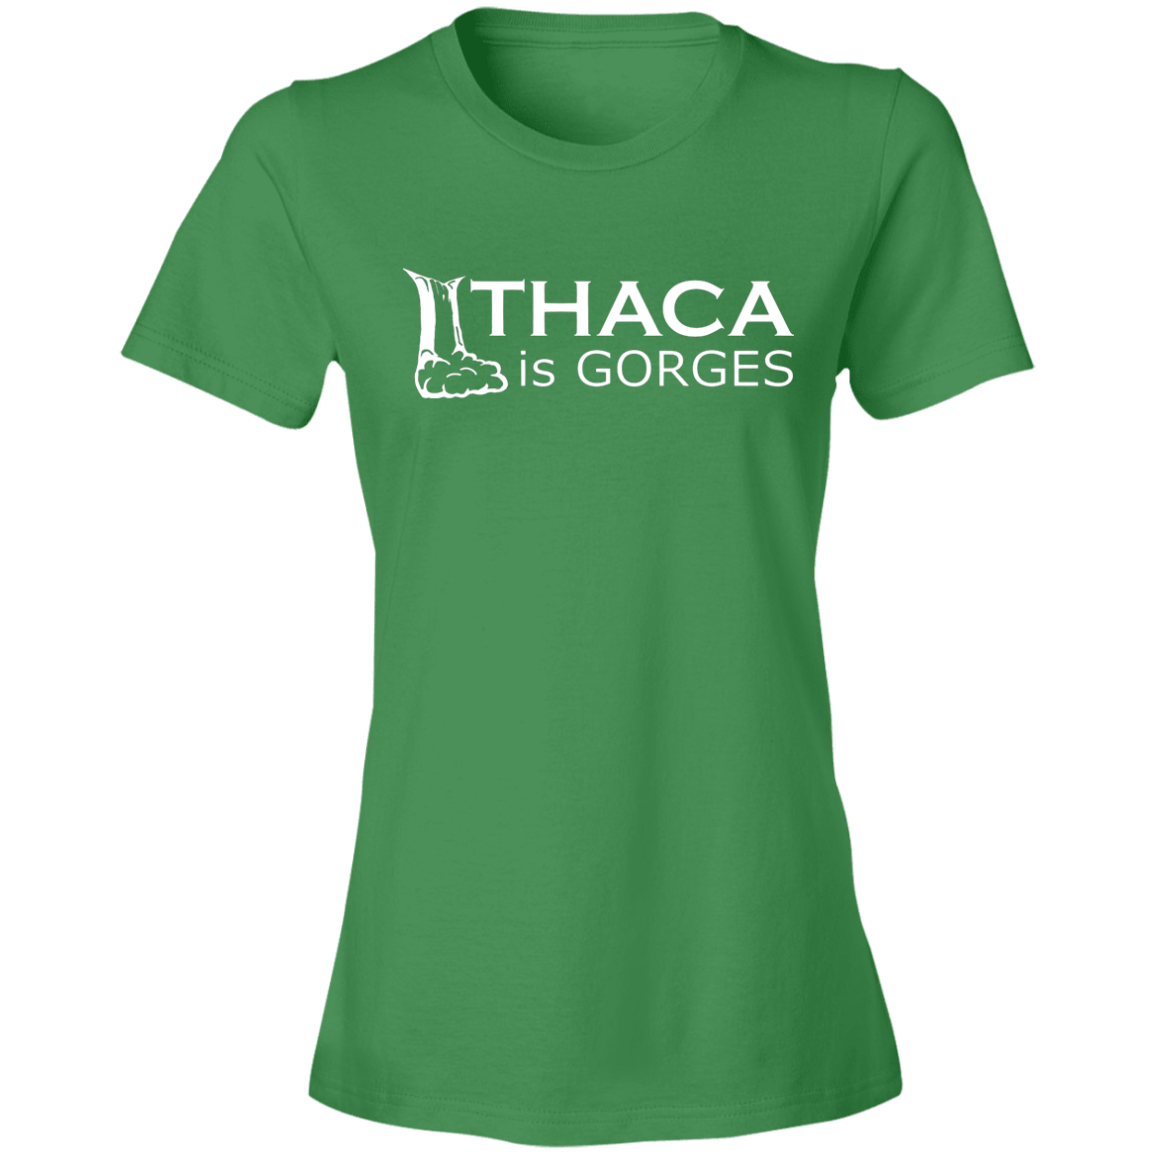 Ithaca is Gorges Lightweight Ladies T-Shirt (White Graphic)